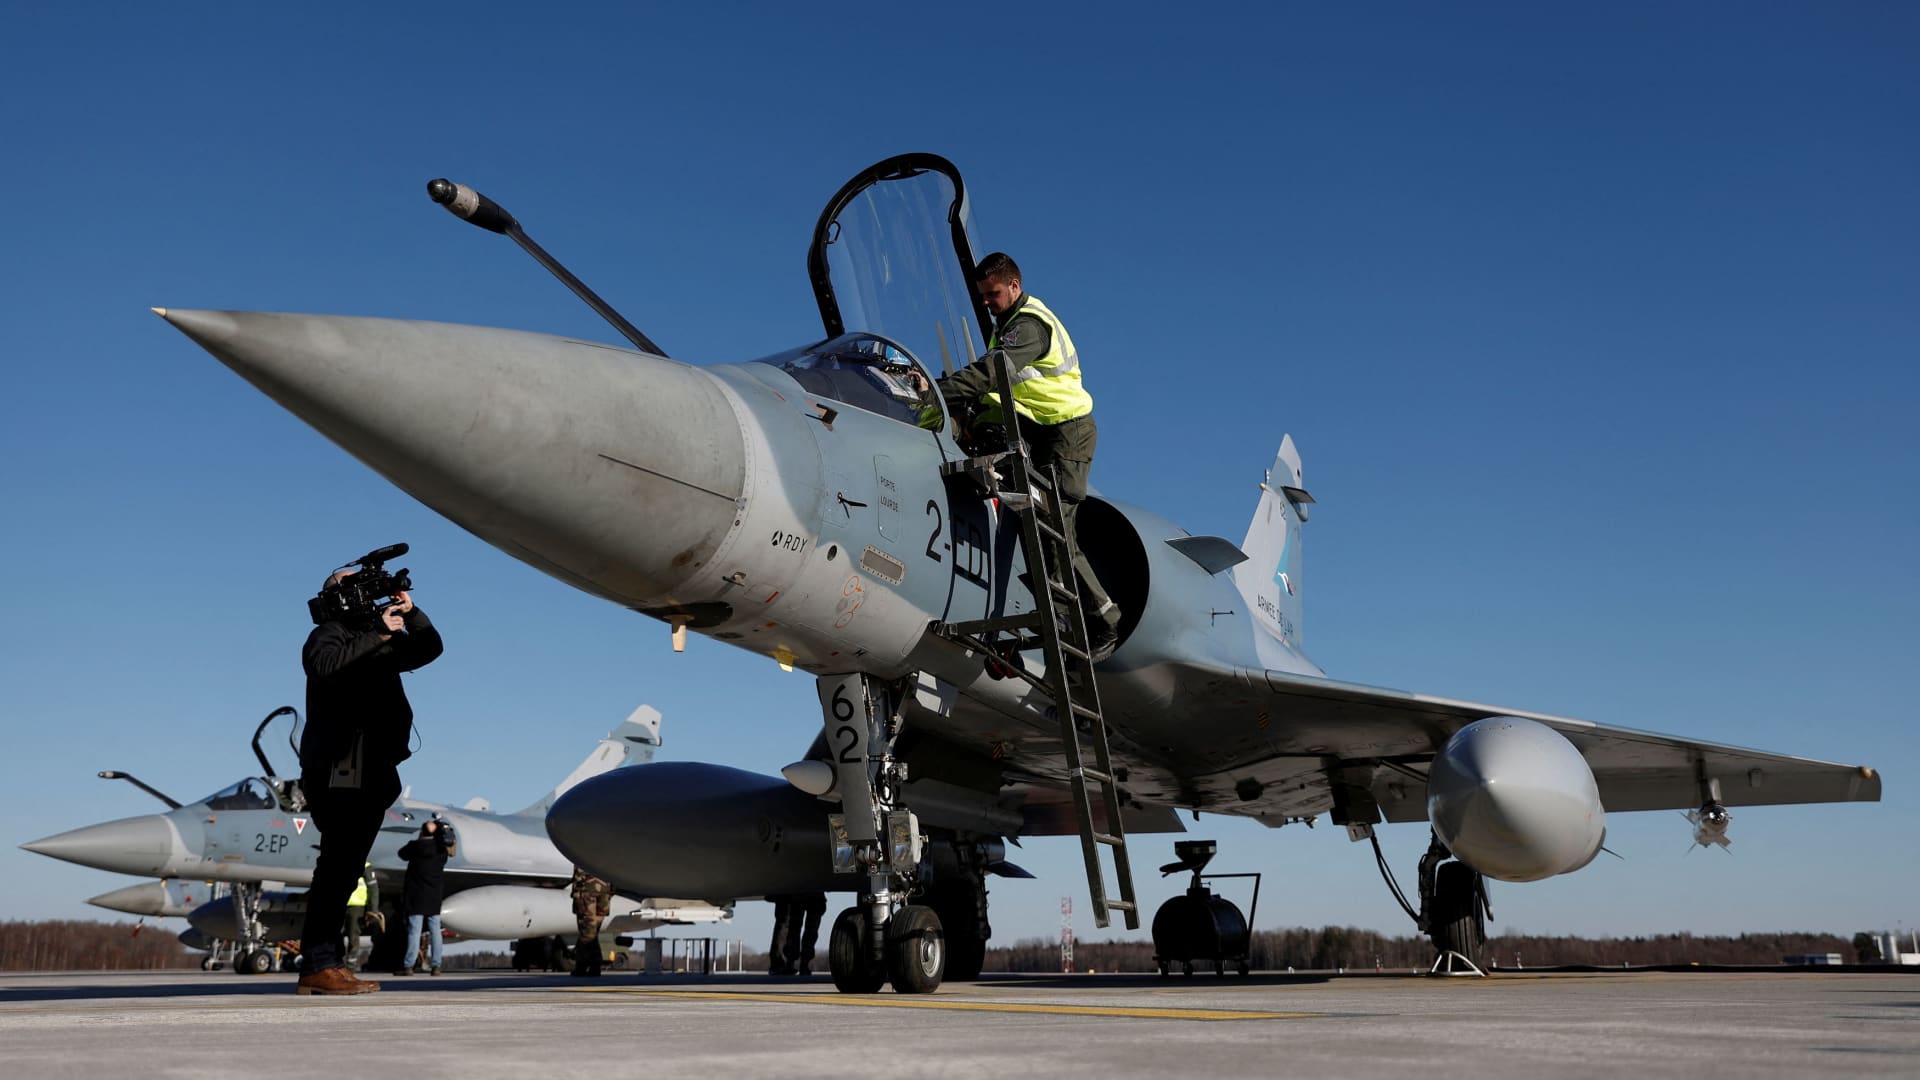 A Mirage 2000-5F fighter aircraft that served as part of NATO's enhanced Air Policing (eAP) to secure the skies over Baltic allies following Russia's invasion of Ukraine, is seen at Amari military airbase in Amari, Estonia, March 17, 2022.